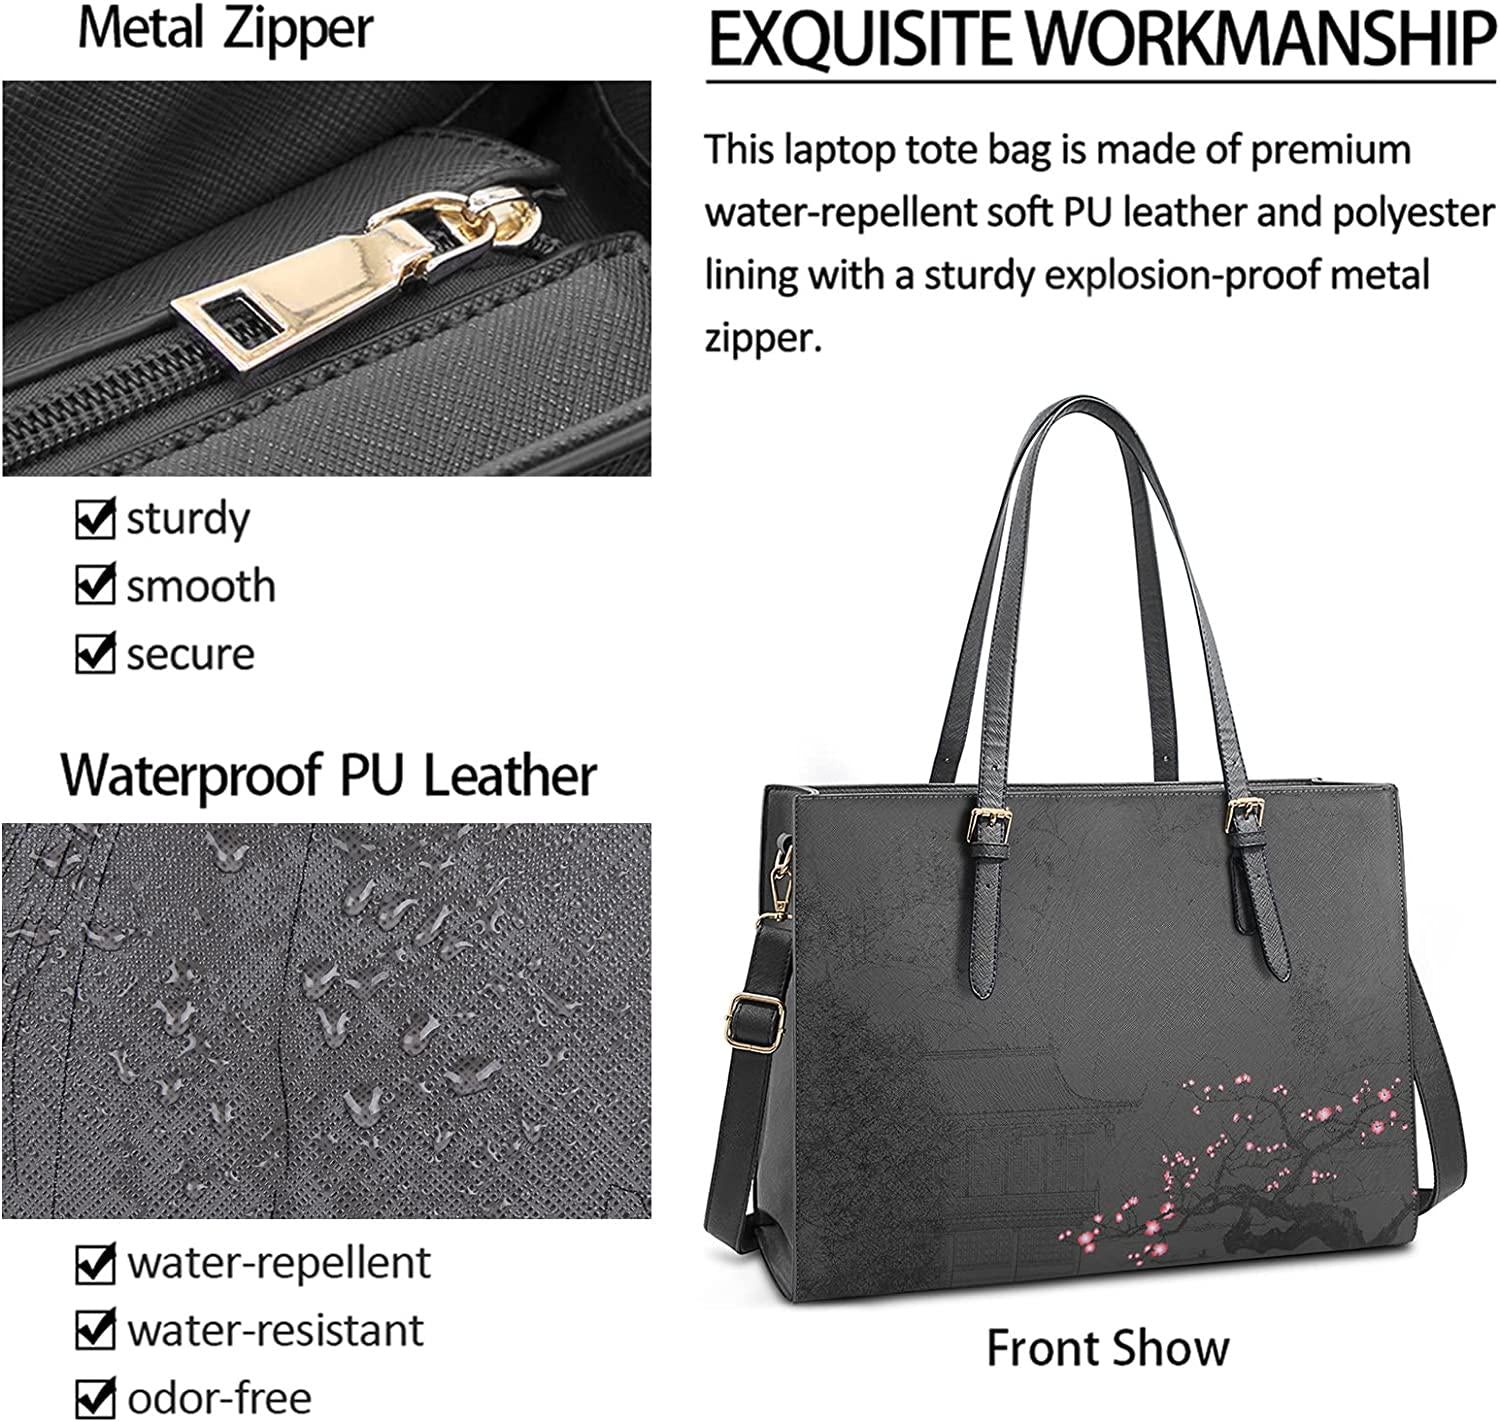 NUBILY, Laptop Bag for Women Waterproof Lightweight Leather 15.6 Inch Computer Tote Bag